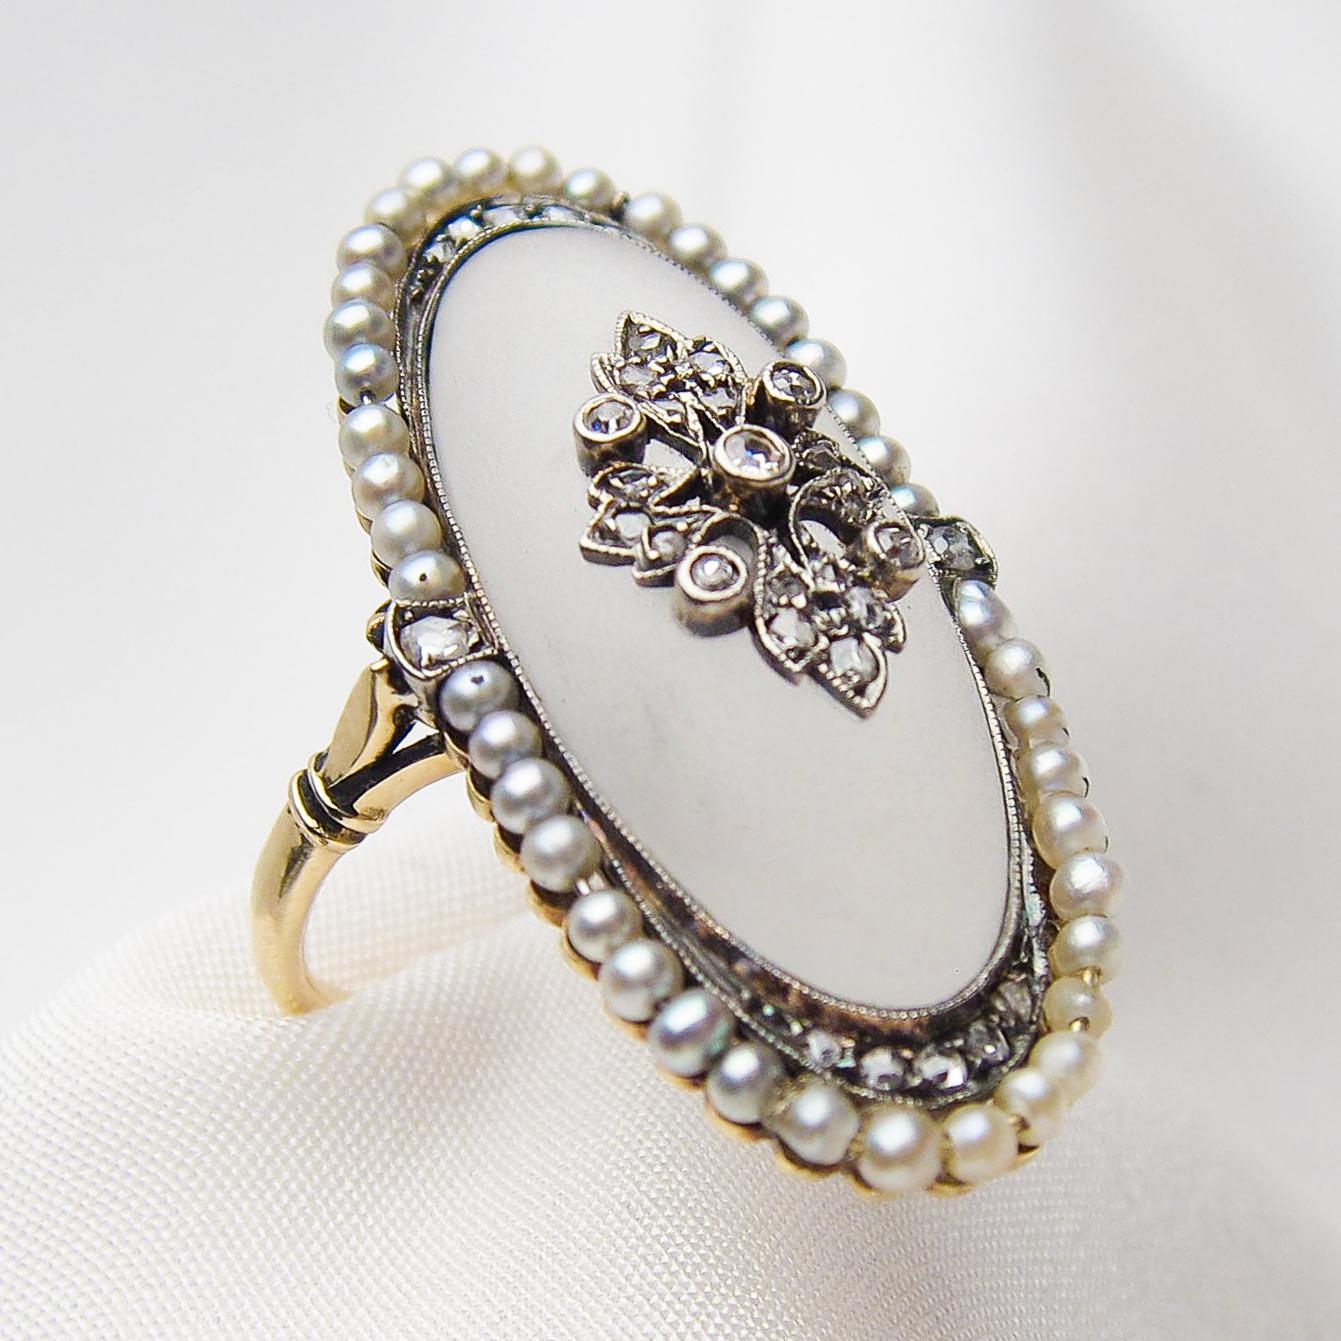 This regal handmade Victorian ring features a fantastic oval, cabochon-cut camphor glass piece decorated with a silver leaf motif, bead- and bezel-set with 15 rose-cut diamonds and five old European-cut diamonds. Bead-set in a halo around the glass